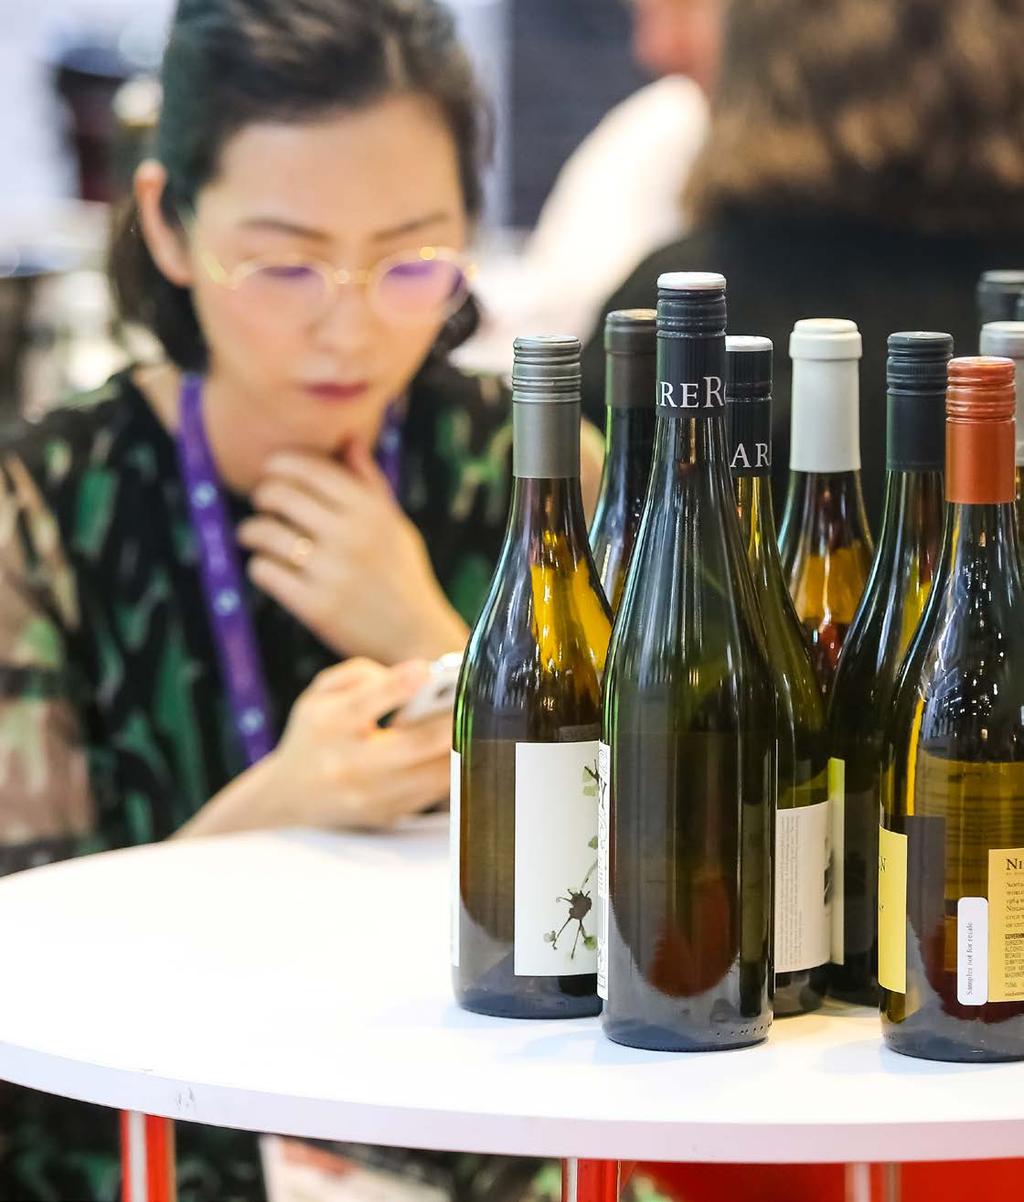 A GLOBAL OFFER Vinexpo Hong Kong celebrated its 20 th anniversary with the widest range of wines and spirits ever presented in Asia: 1,465 exhibitors from 30